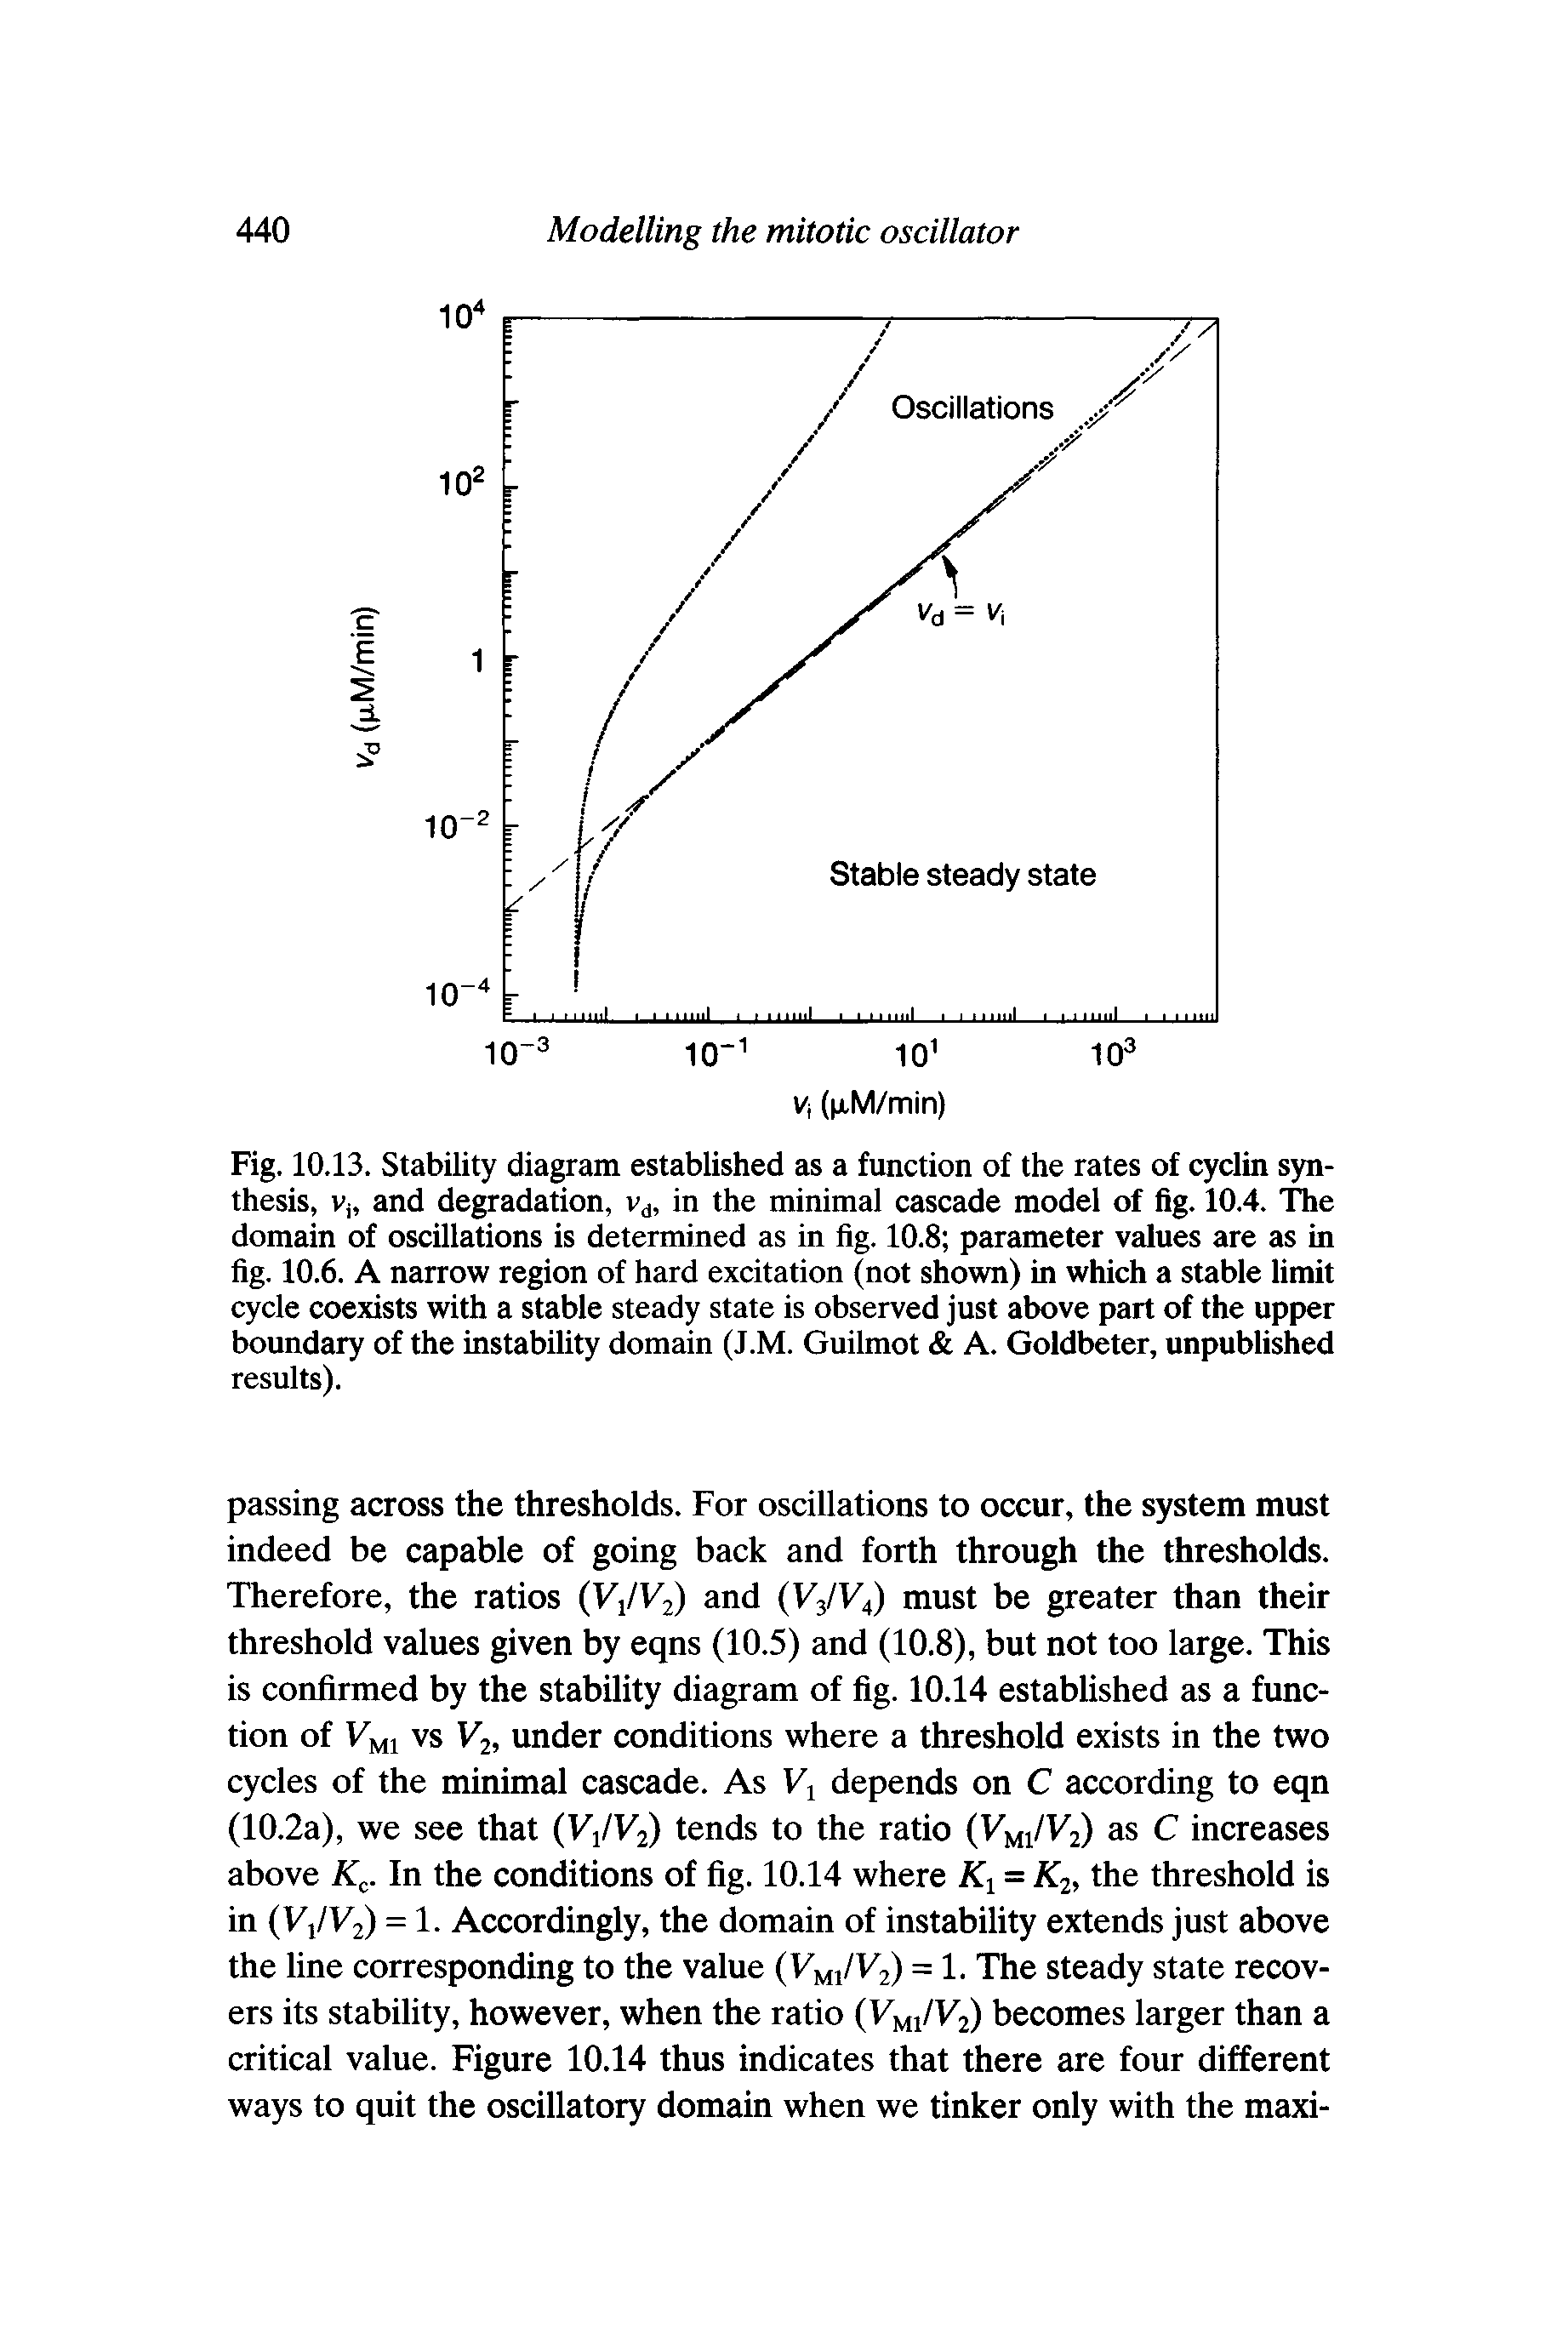 Fig. 10.13. Stability diagram established as a function of the rates of cyclin synthesis, Vj, and degradation, v, in the minimal cascade model of fig. 10.4. The domain of oscillations is determined as in fig. 10.8 parameter values are as in fig. 10.6. A narrow region of hard excitation (not shown) in which a stable limit cycle coexists with a stable steady state is observed just above part of the upper boundary of the instability domain (J.M. Guilmot A. Goldbeter, unpublished results).